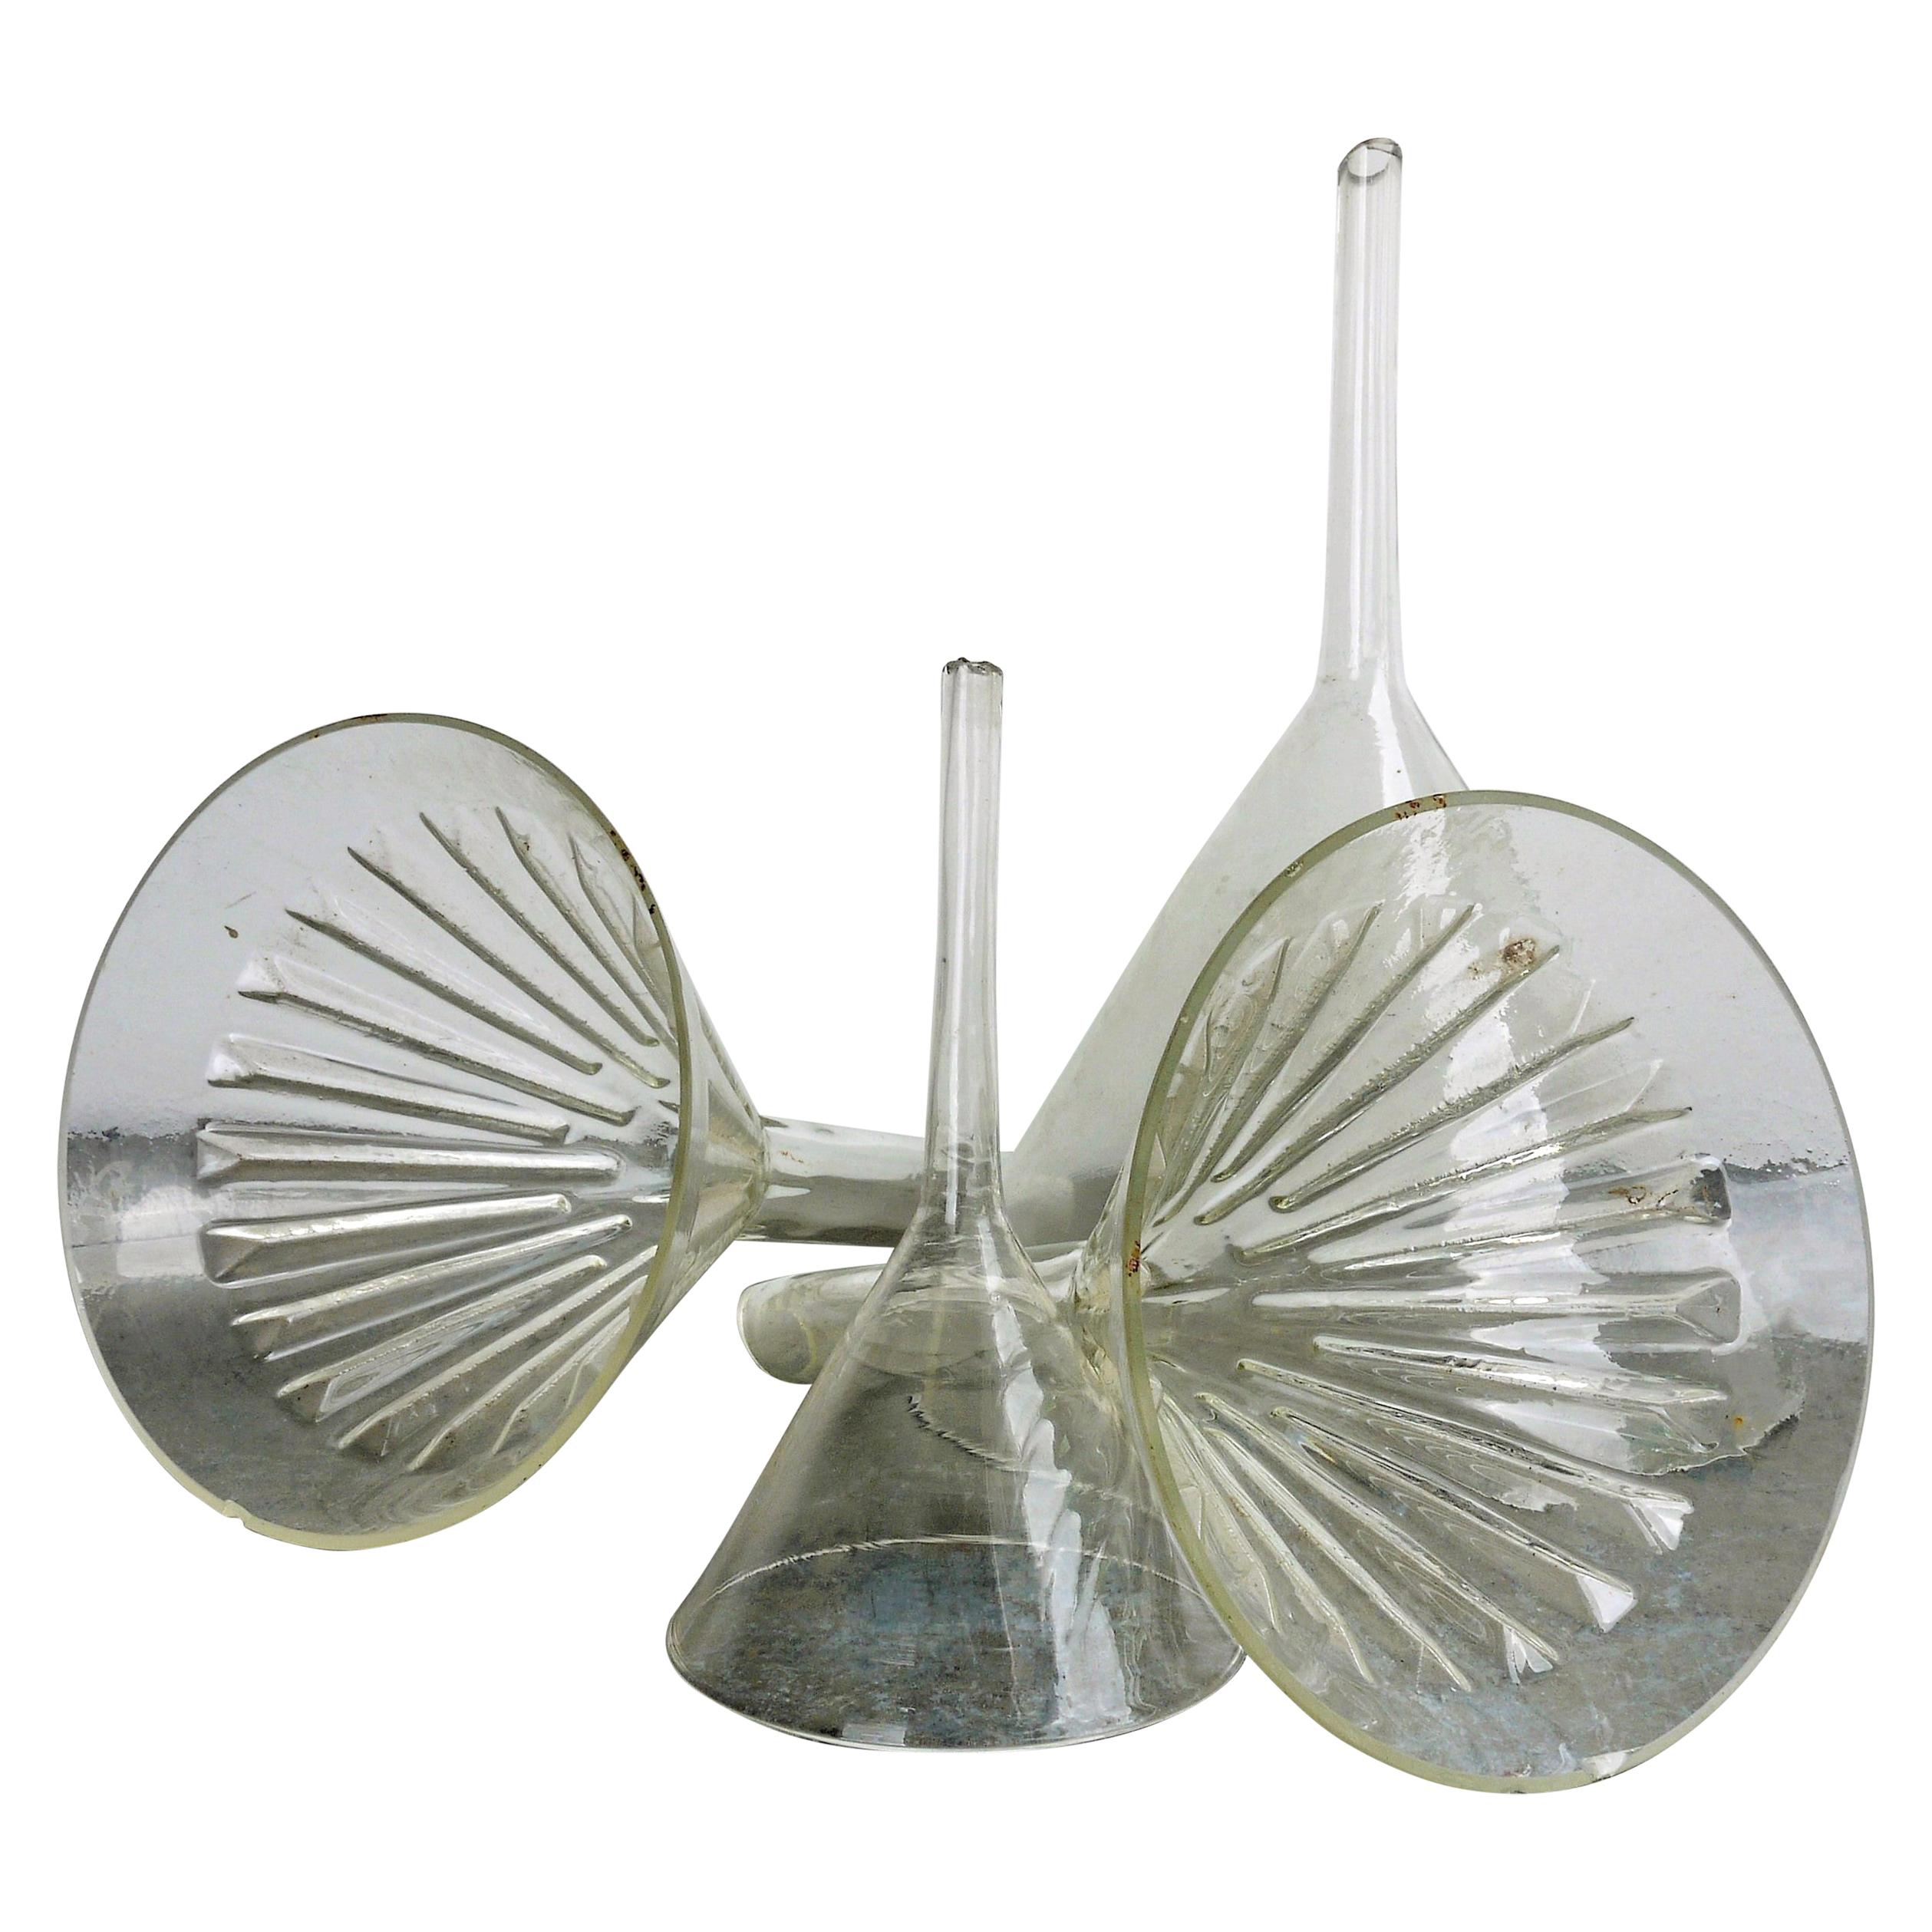 1950s Decorative Collection of Large 'And Small' Glass Funnels